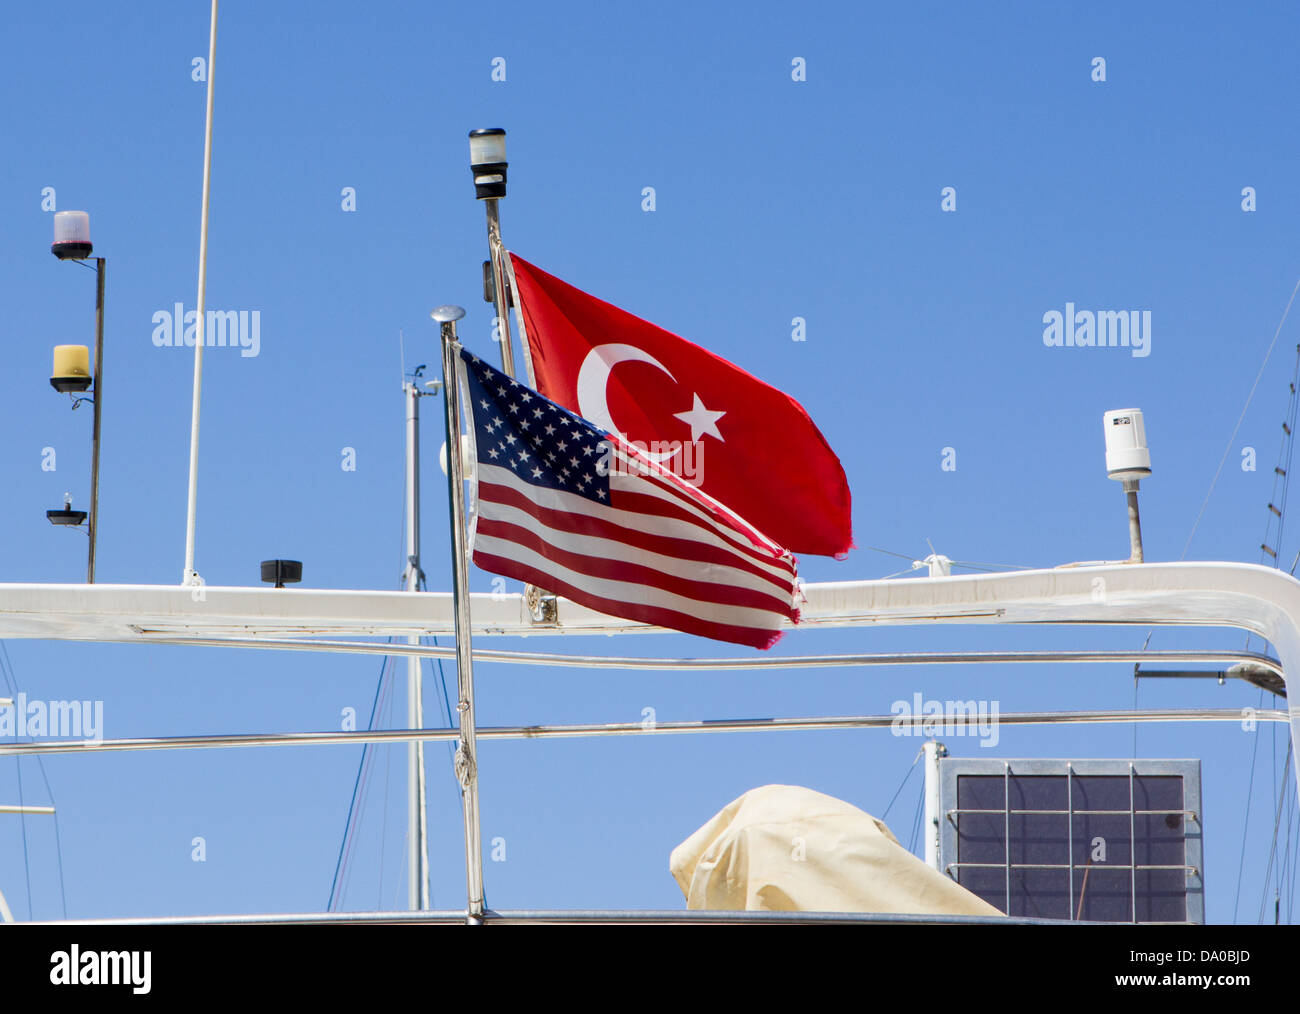 Turkish and American flags flying together on a boat Stock Photo